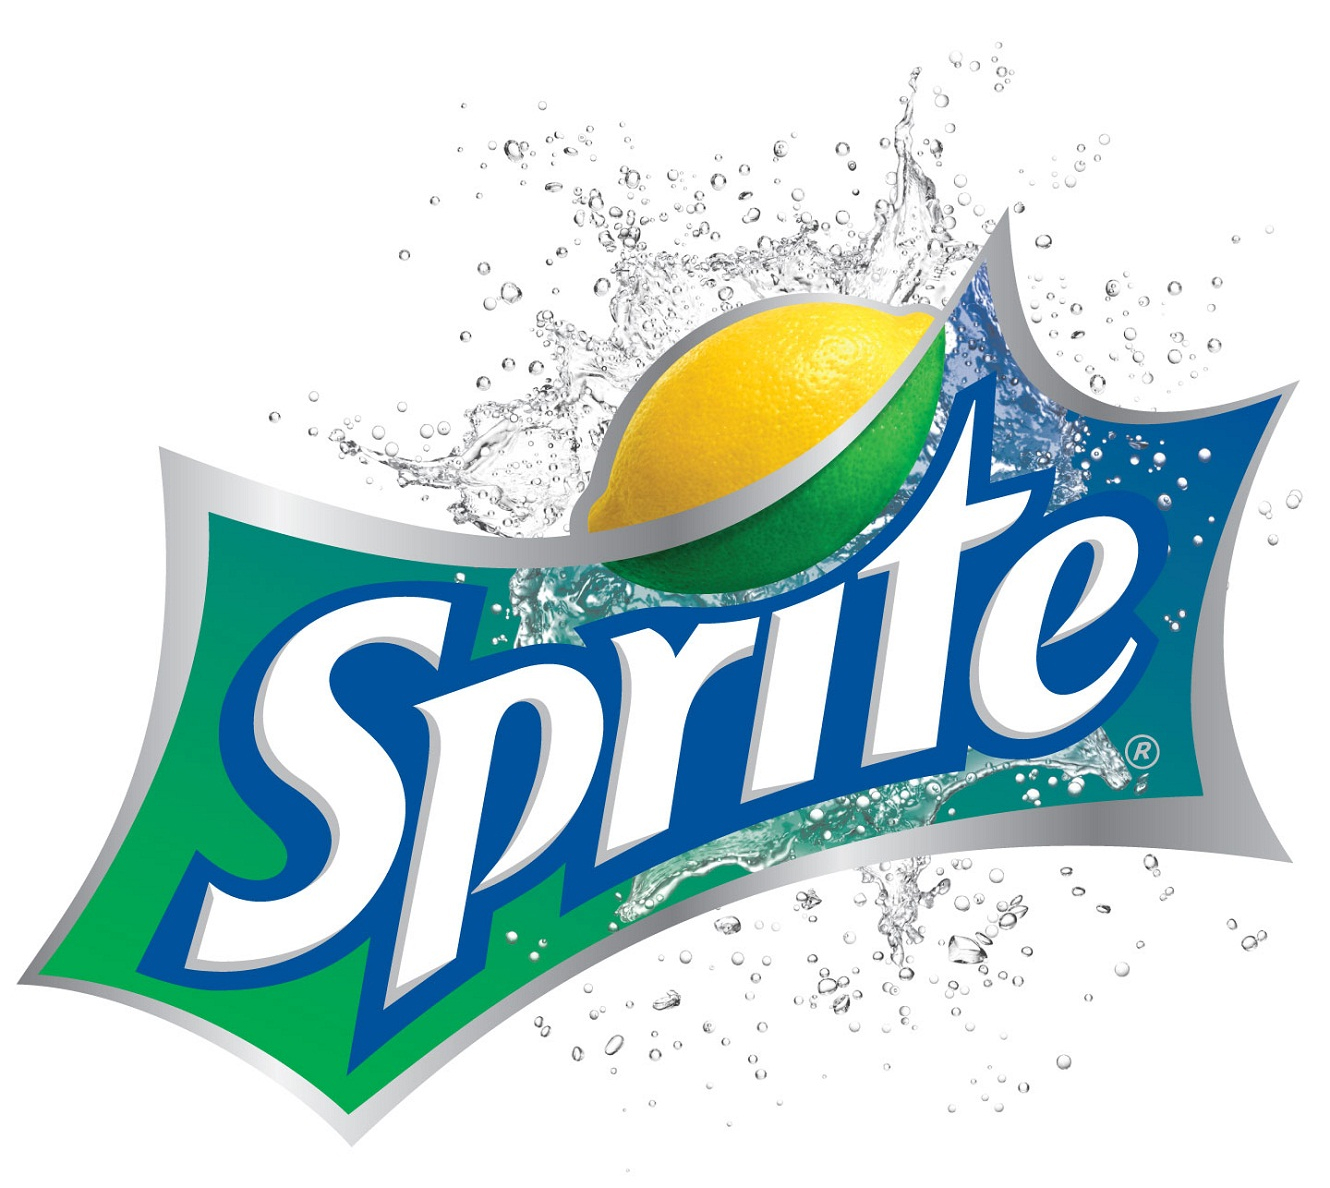 Sprite (soft drink) - Wikipedia, the free encyclopedia